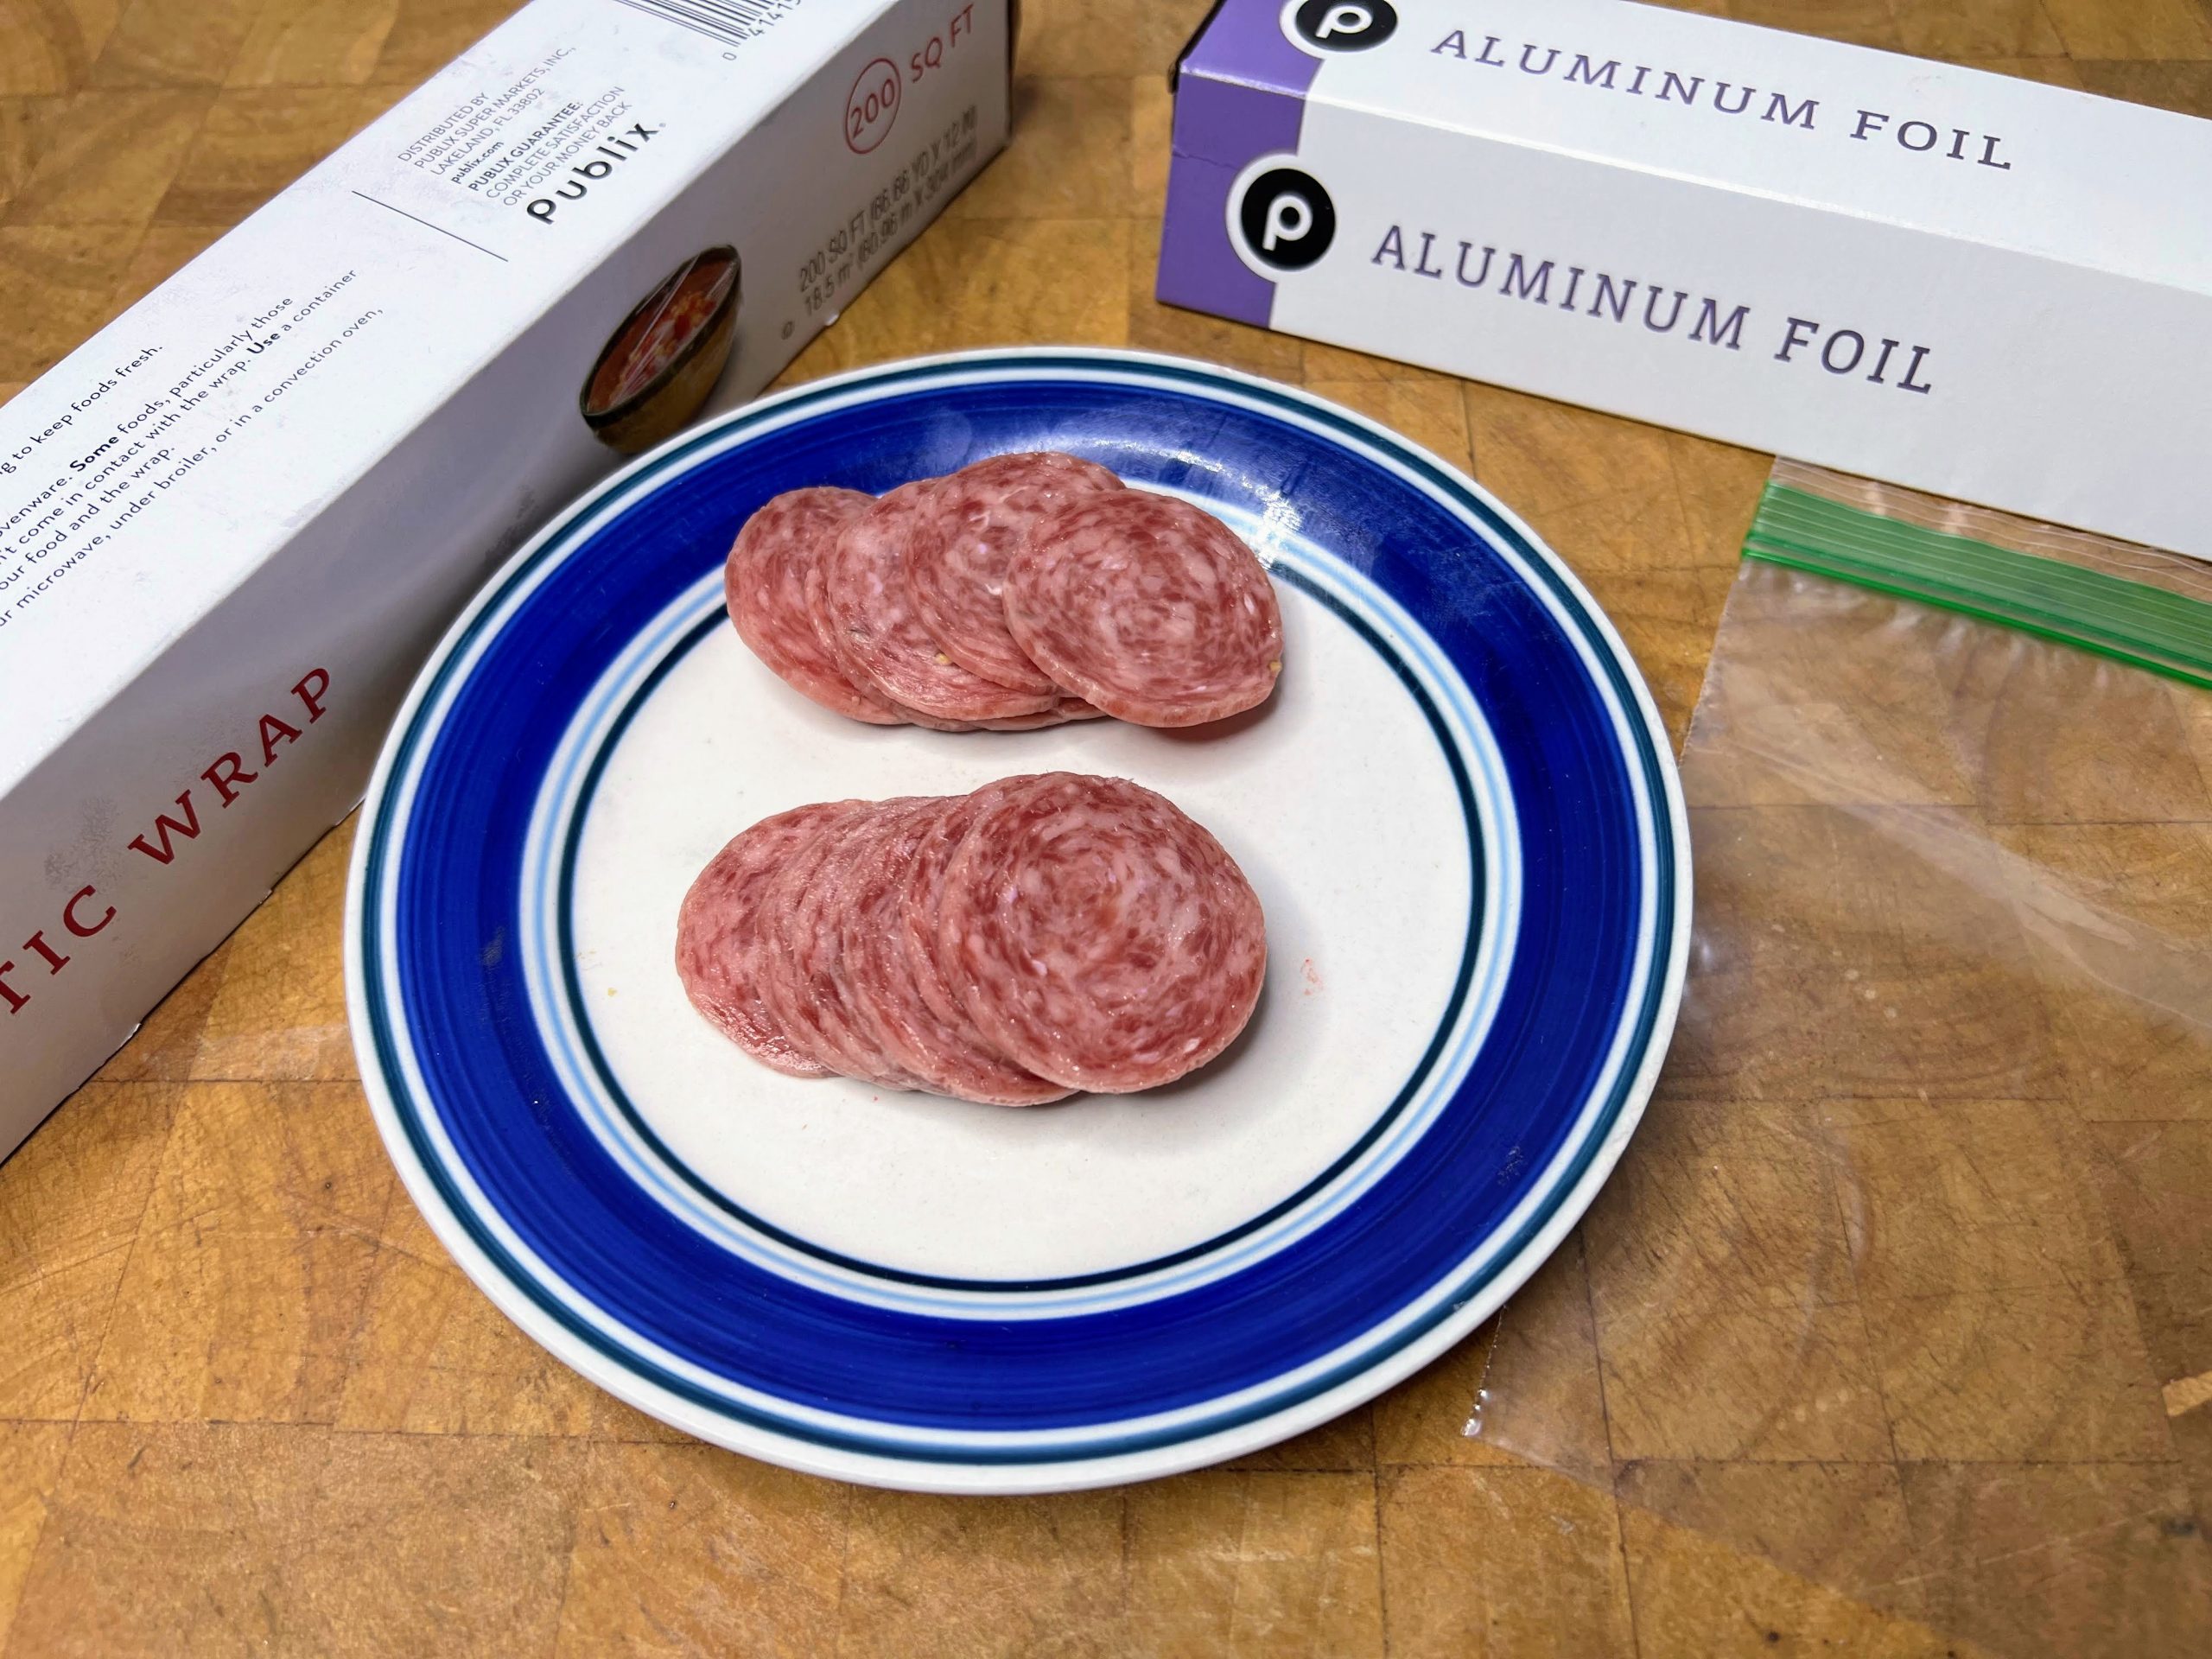 stacks of salami on a plate next to empty freezer bag, aluminum foil and plastic wrap